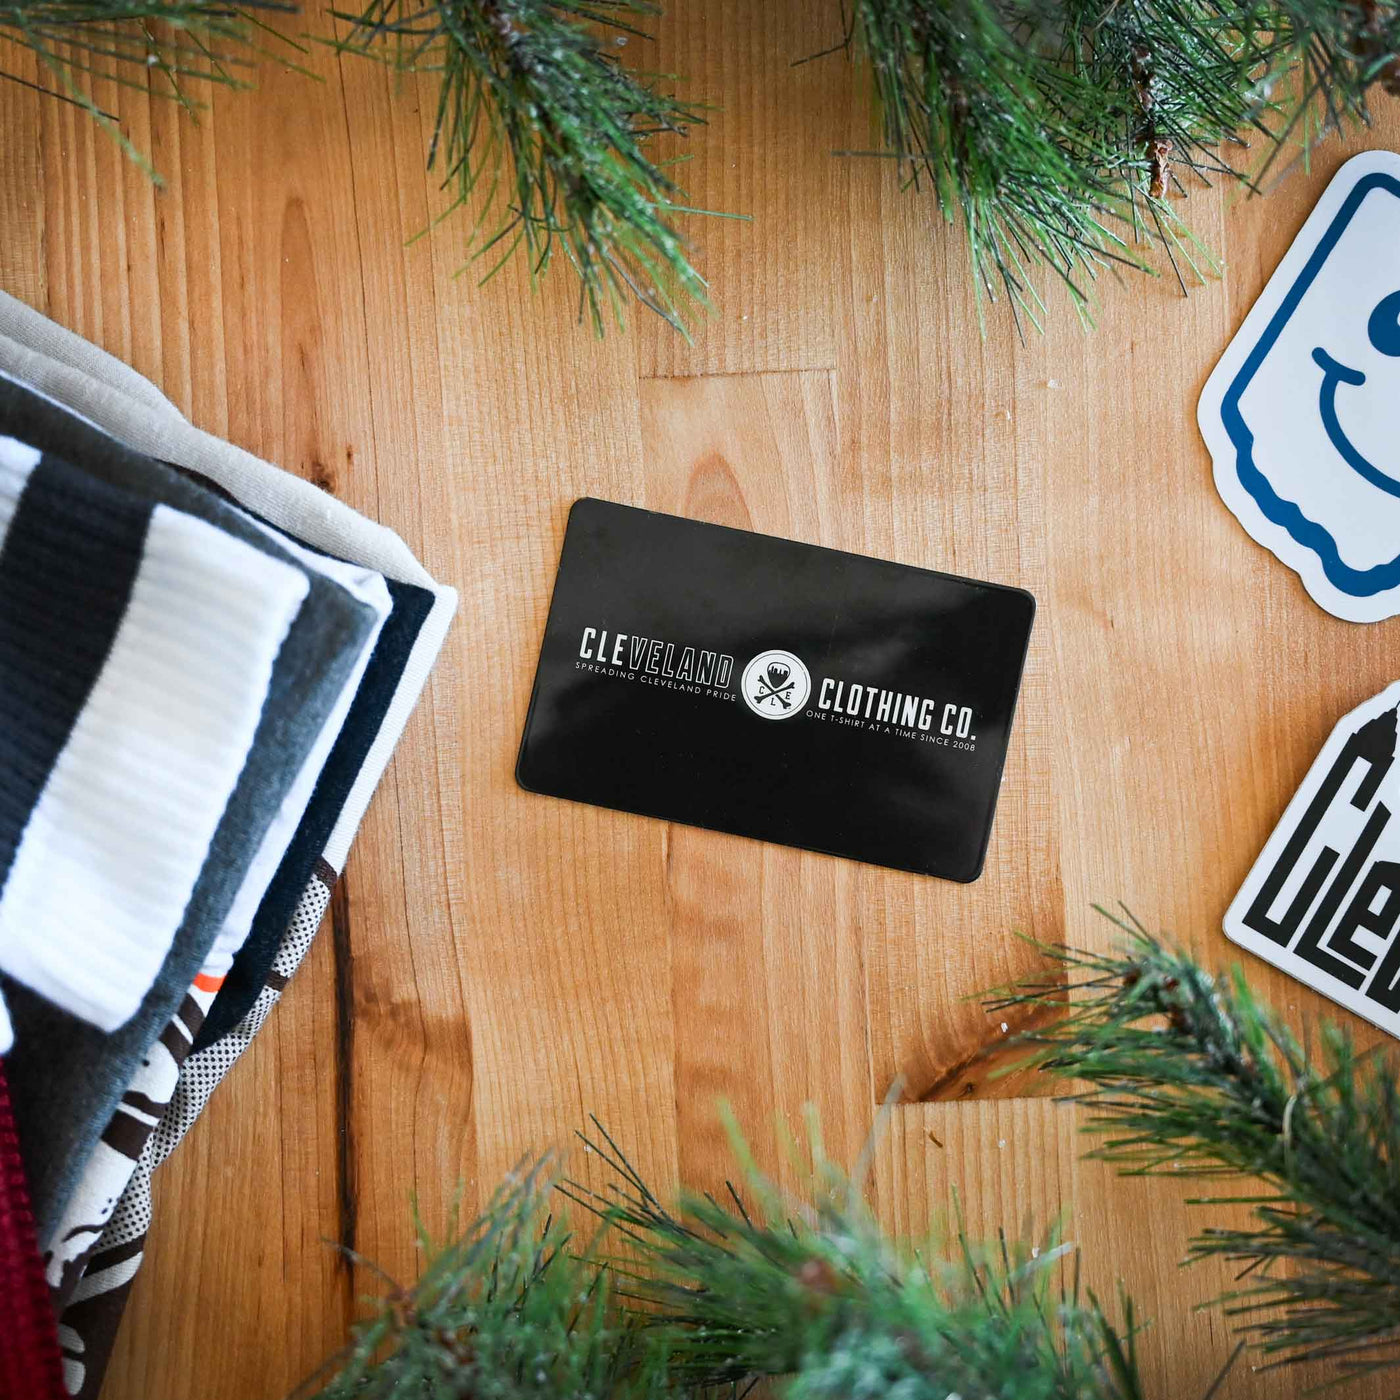 Cleveland Clothing Co. Digital Gift Card